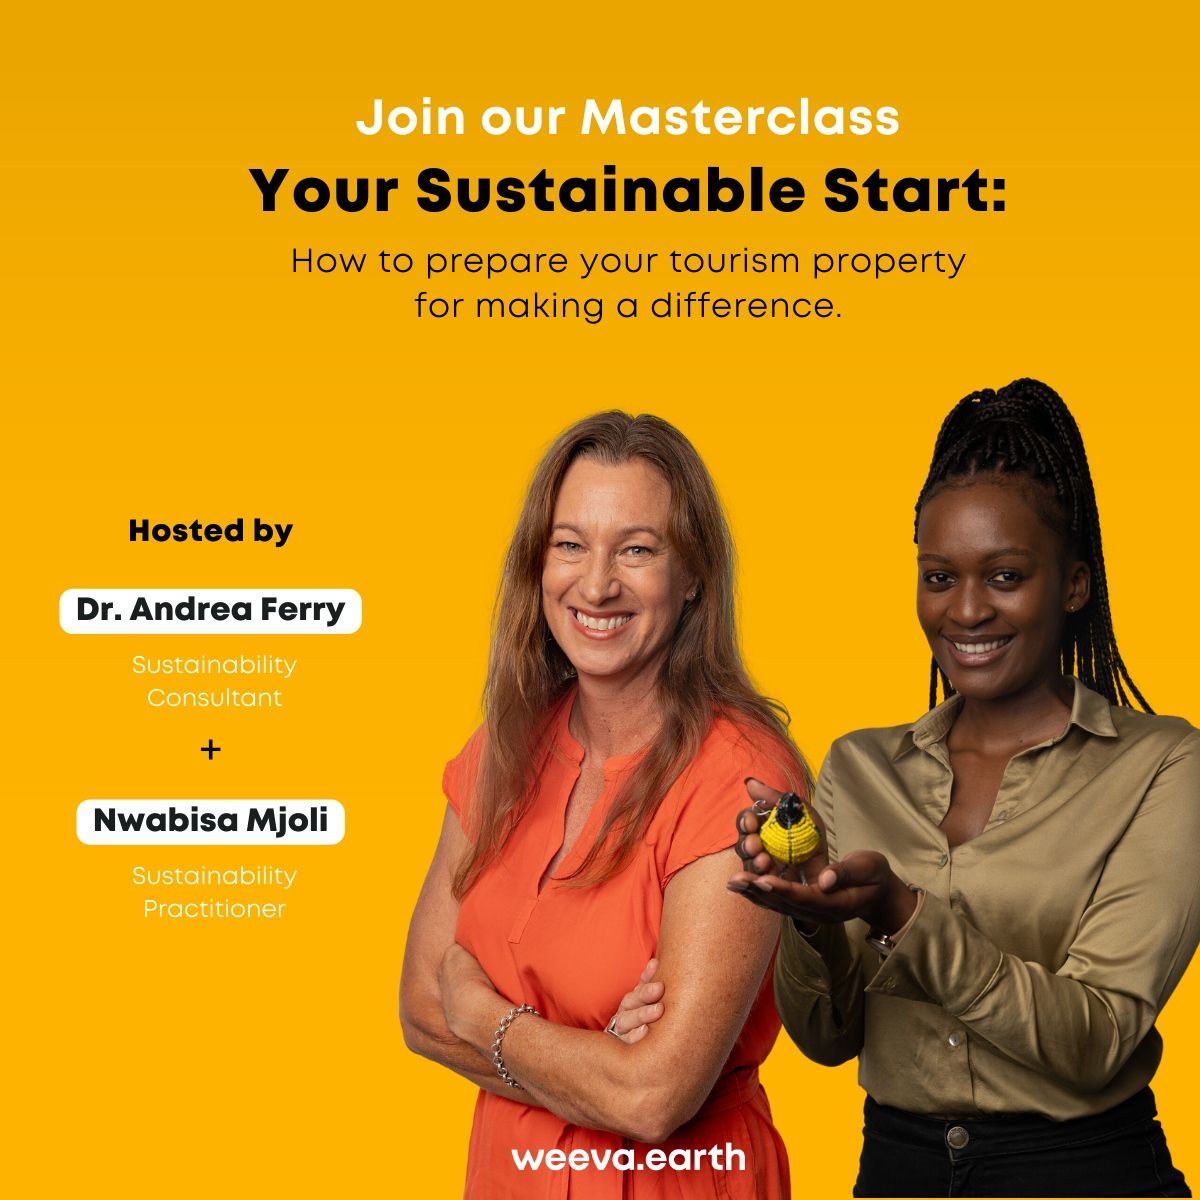 Save your spot for our free Sustainability Masterclass.Join our hosts, Dr. Andrea Ferry and Nwabisa Mjoli, for an interactive session and learn how you can set up your tourism property to make a difference. Click the link below to register: https://lnkd.in/e9fpg-nv 